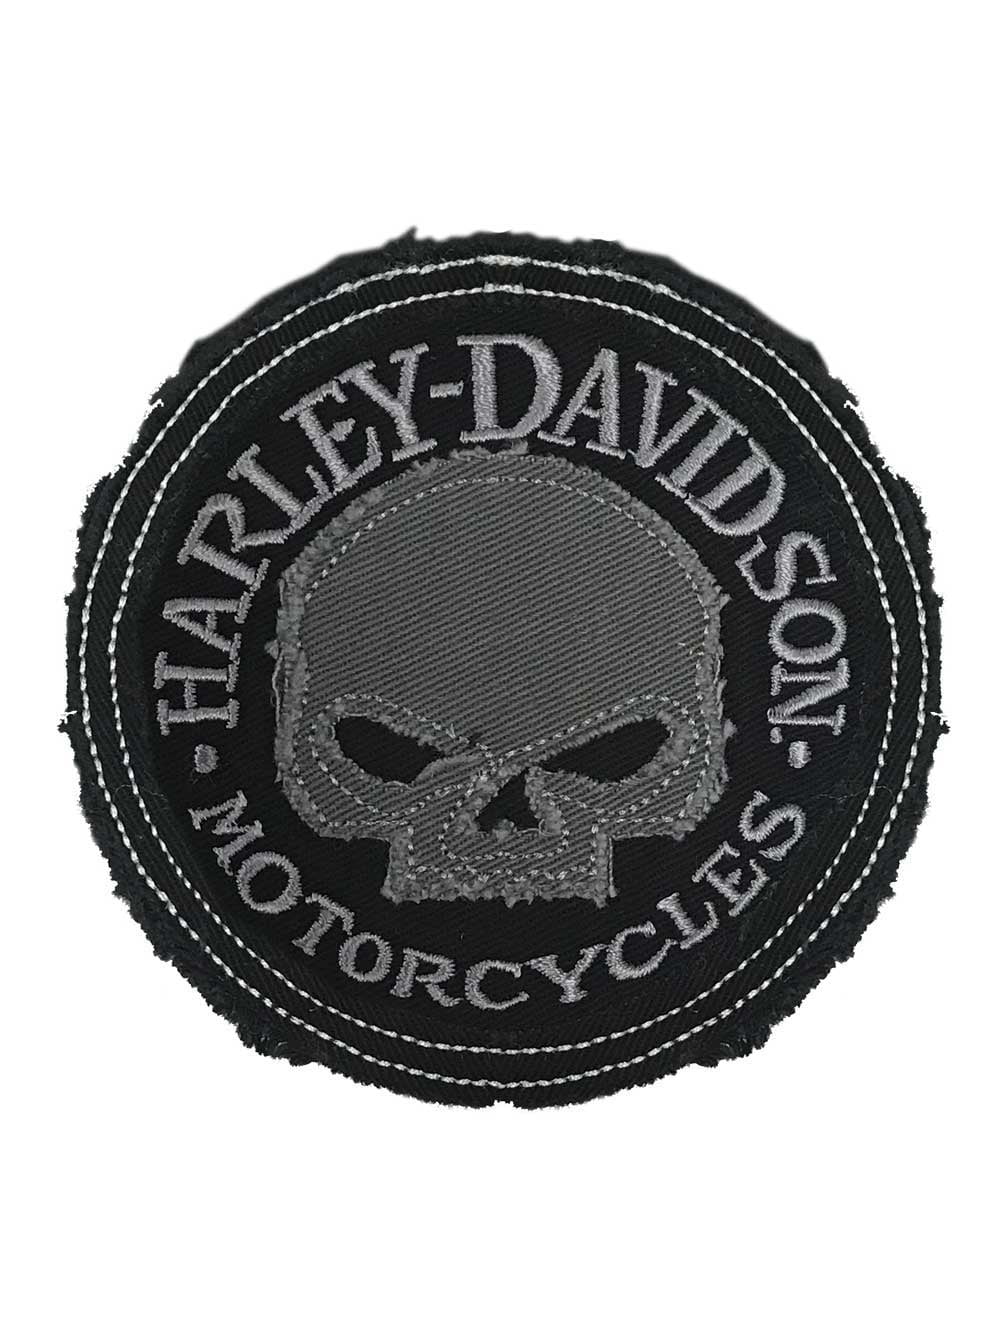 Harley Davidson Motorcycles Iron On Patch Embroidered Sew On Patch Willie G